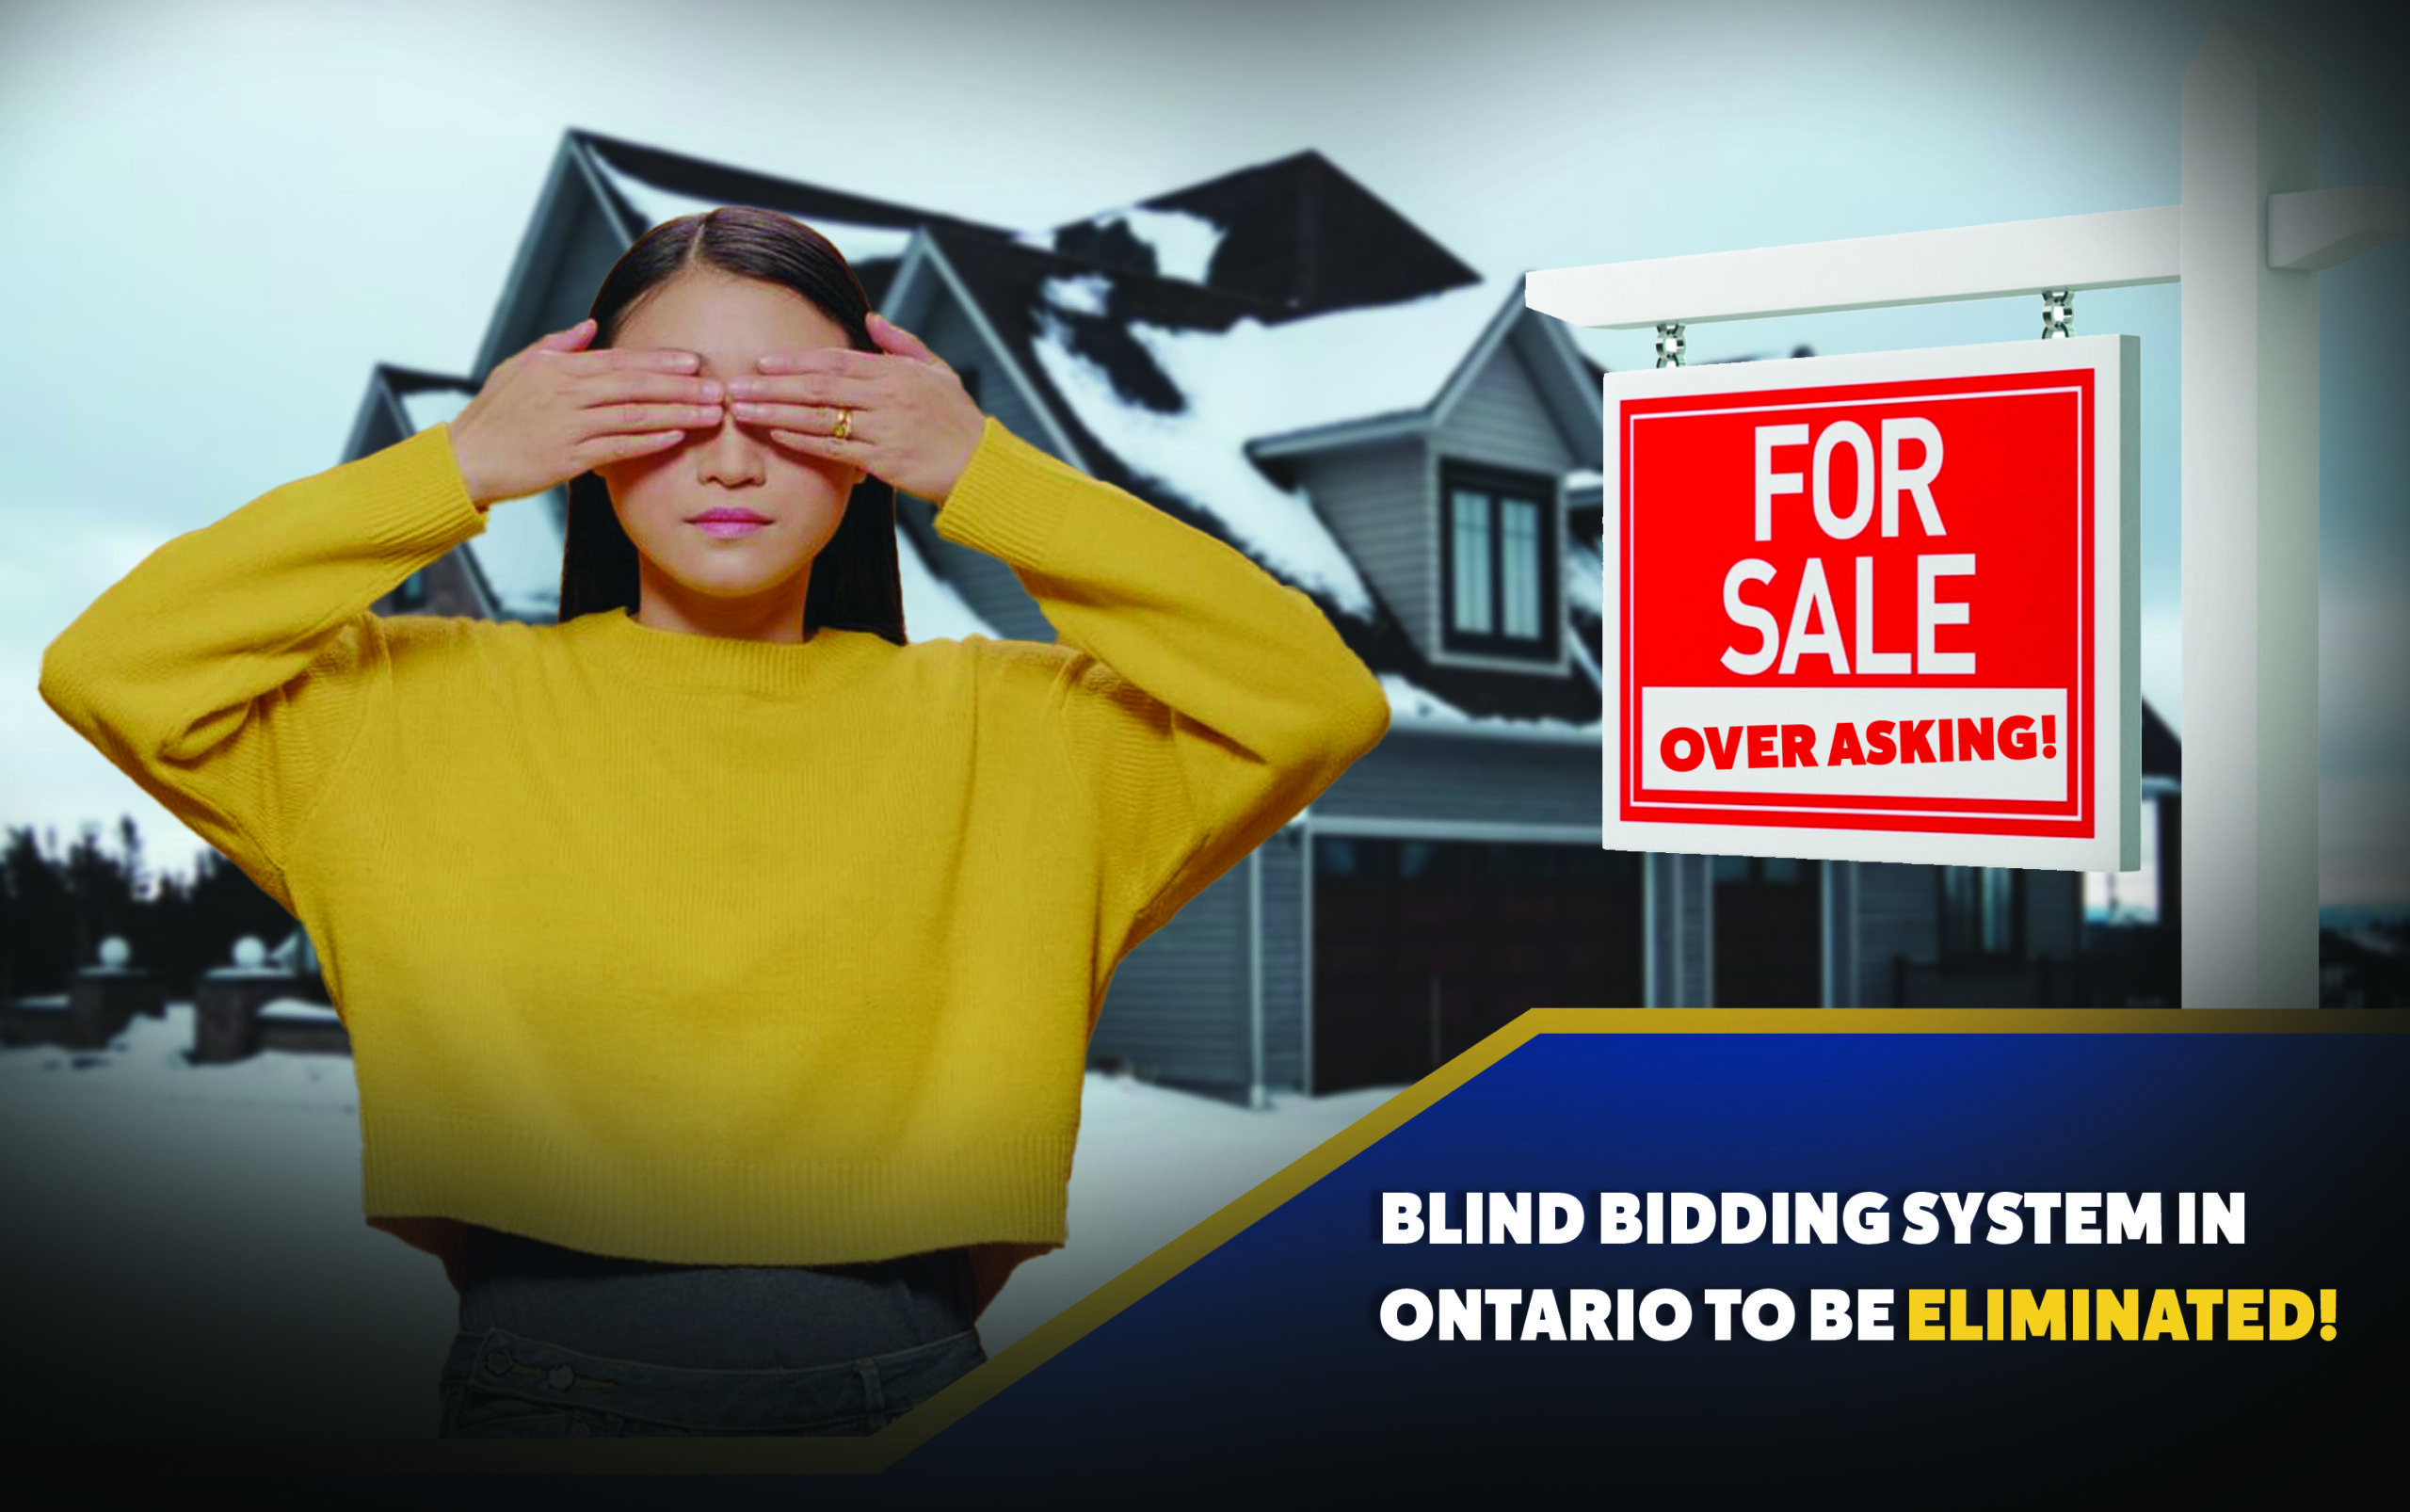 Ending Blind Bidding in Ontario: Who will benefit?